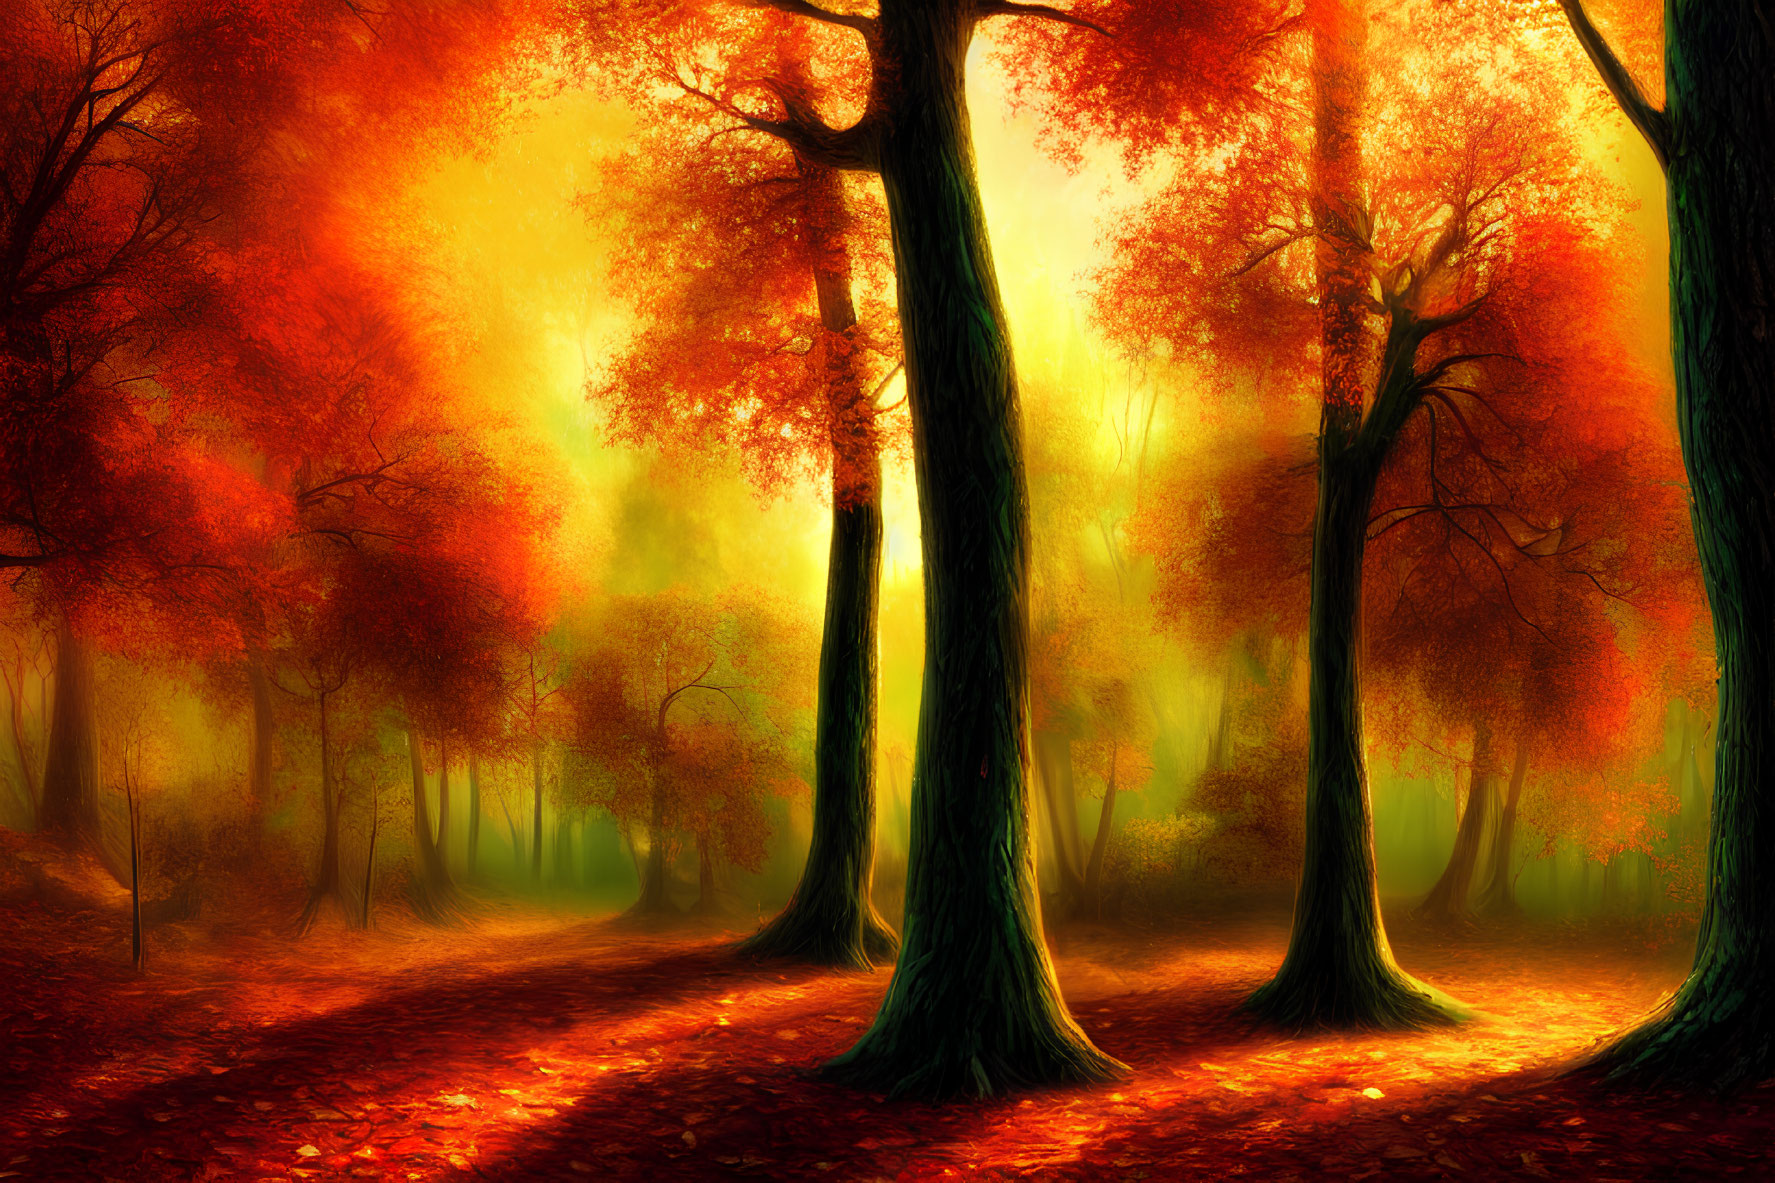 Scenic Autumn Forest with Golden and Red Leaves